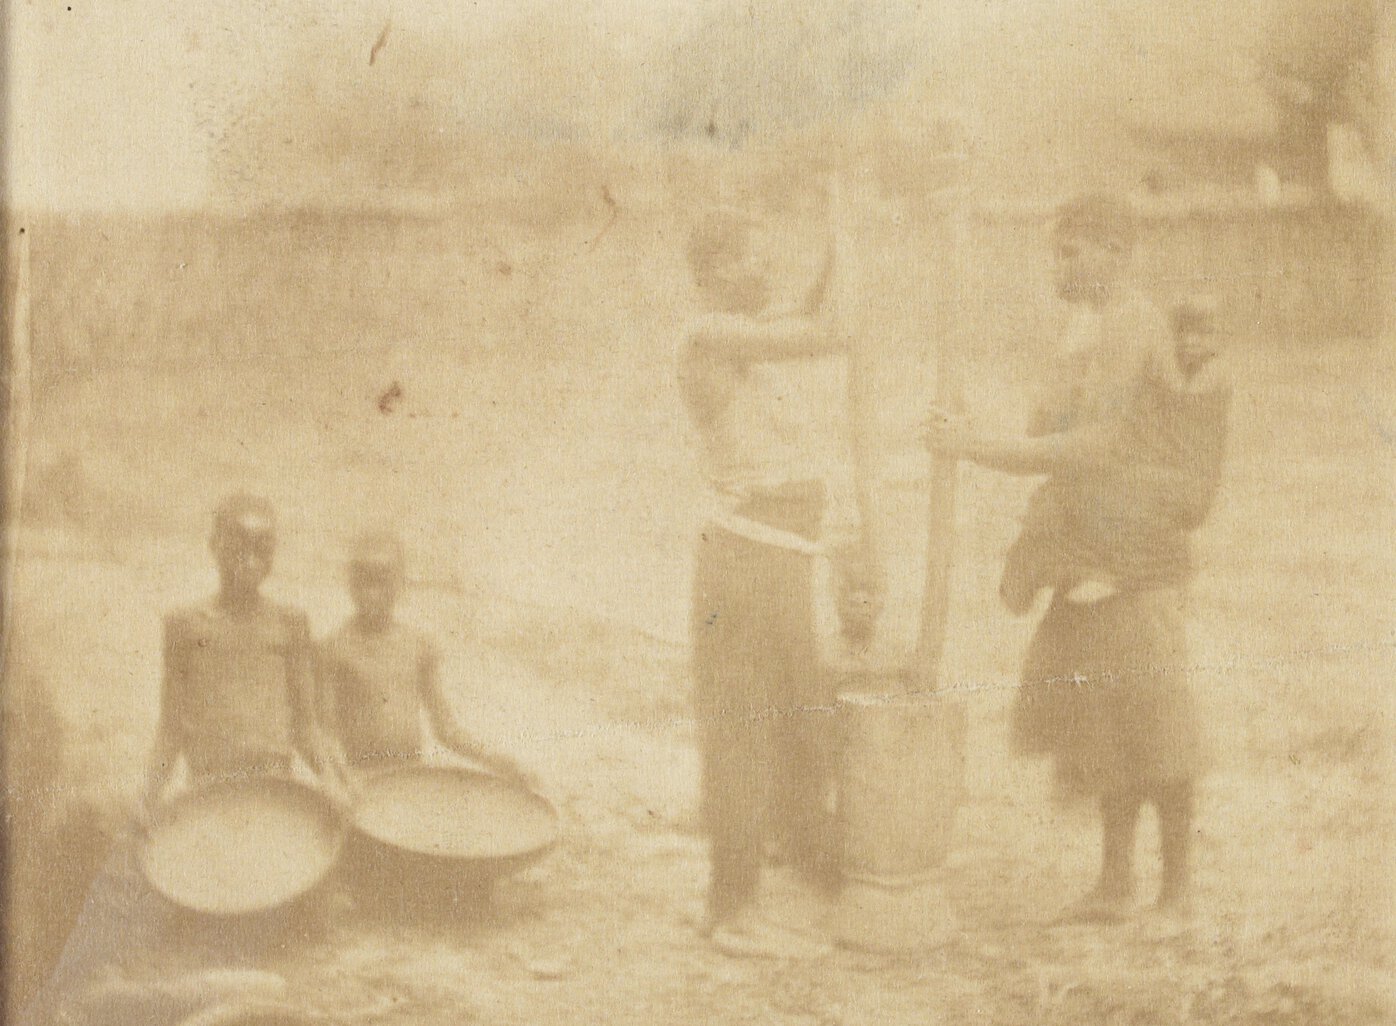 Individuals in African village. Two hold large plates; the others surround domestic implements.